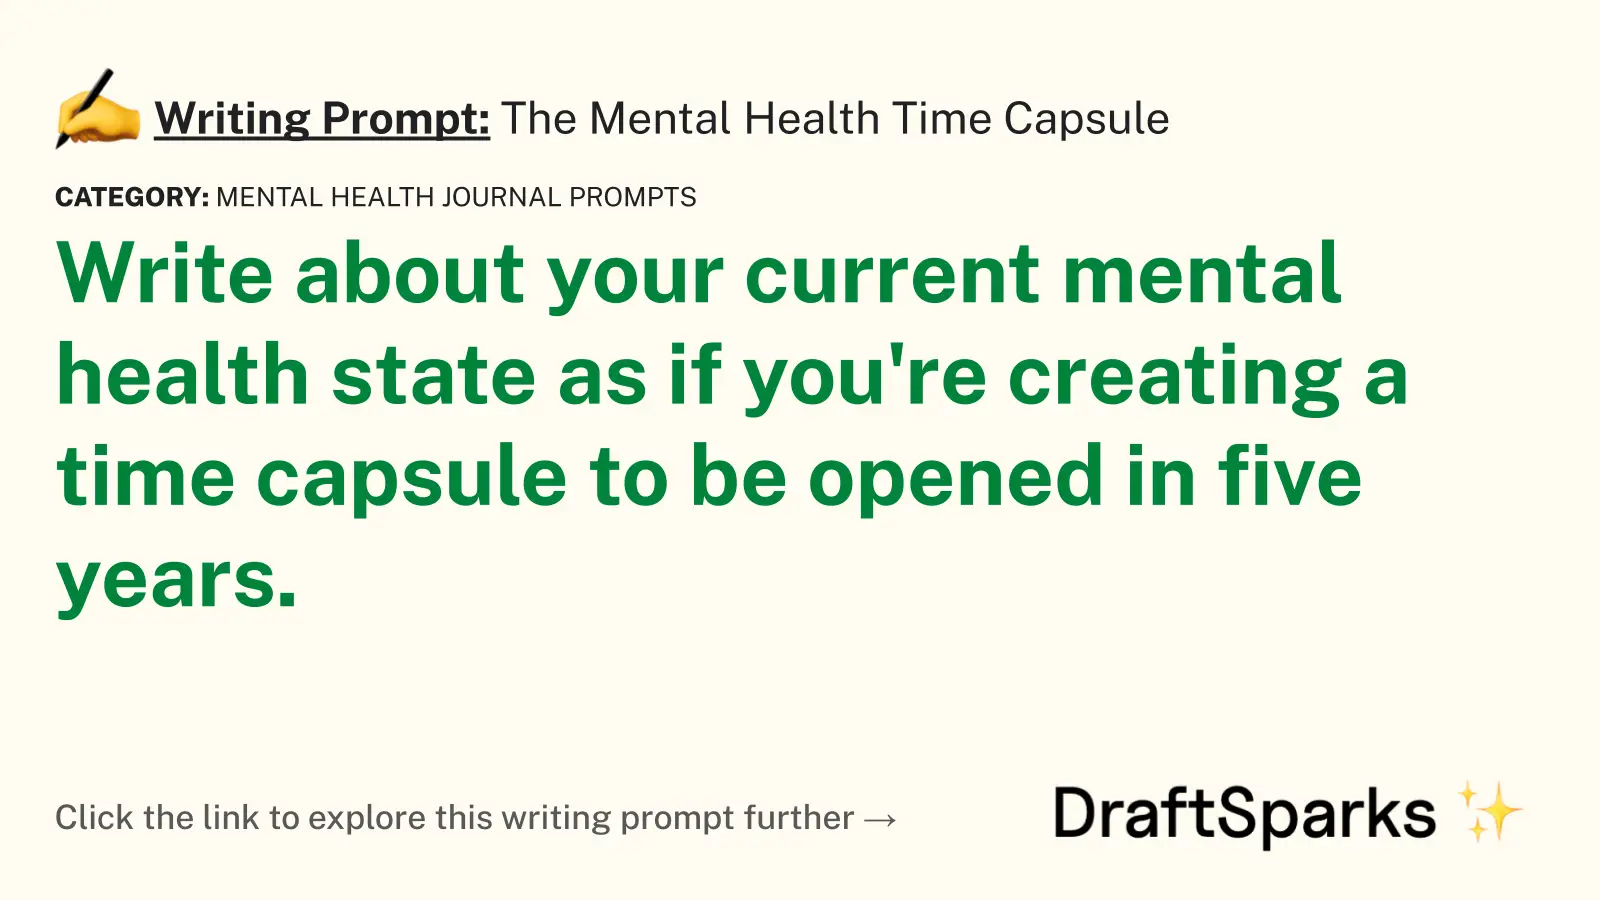 The Mental Health Time Capsule